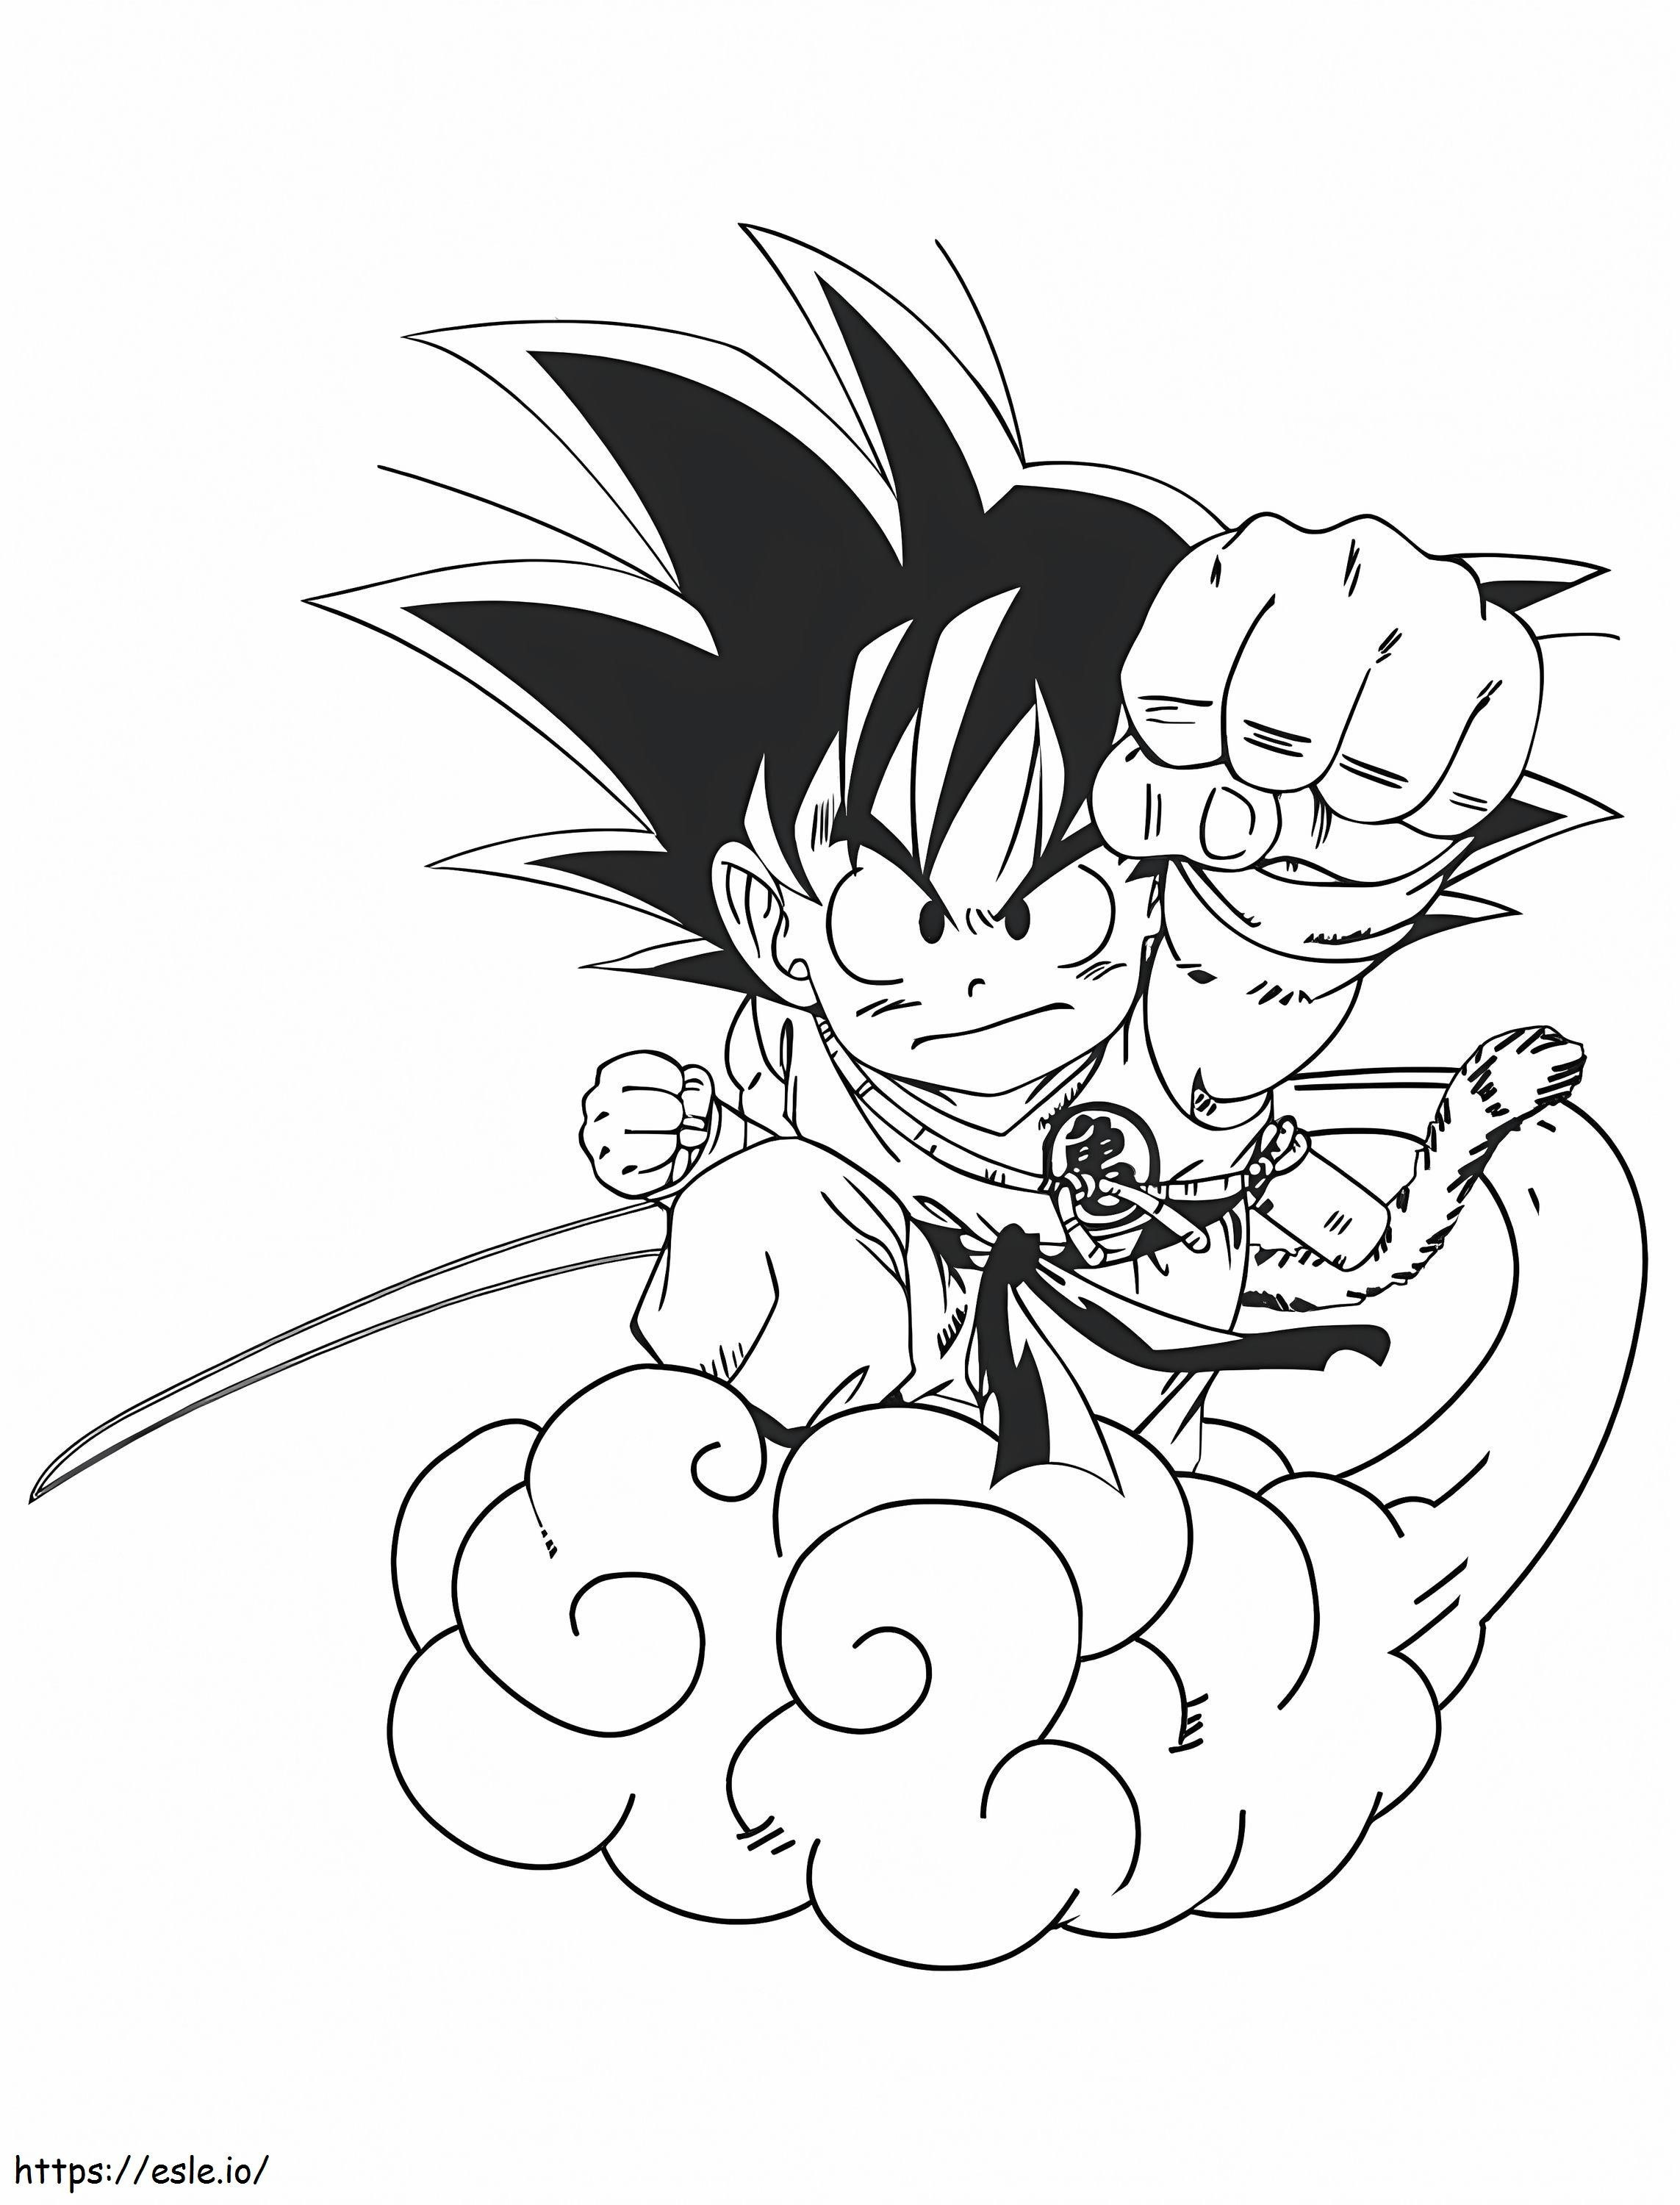 Goku In The Cloud coloring page